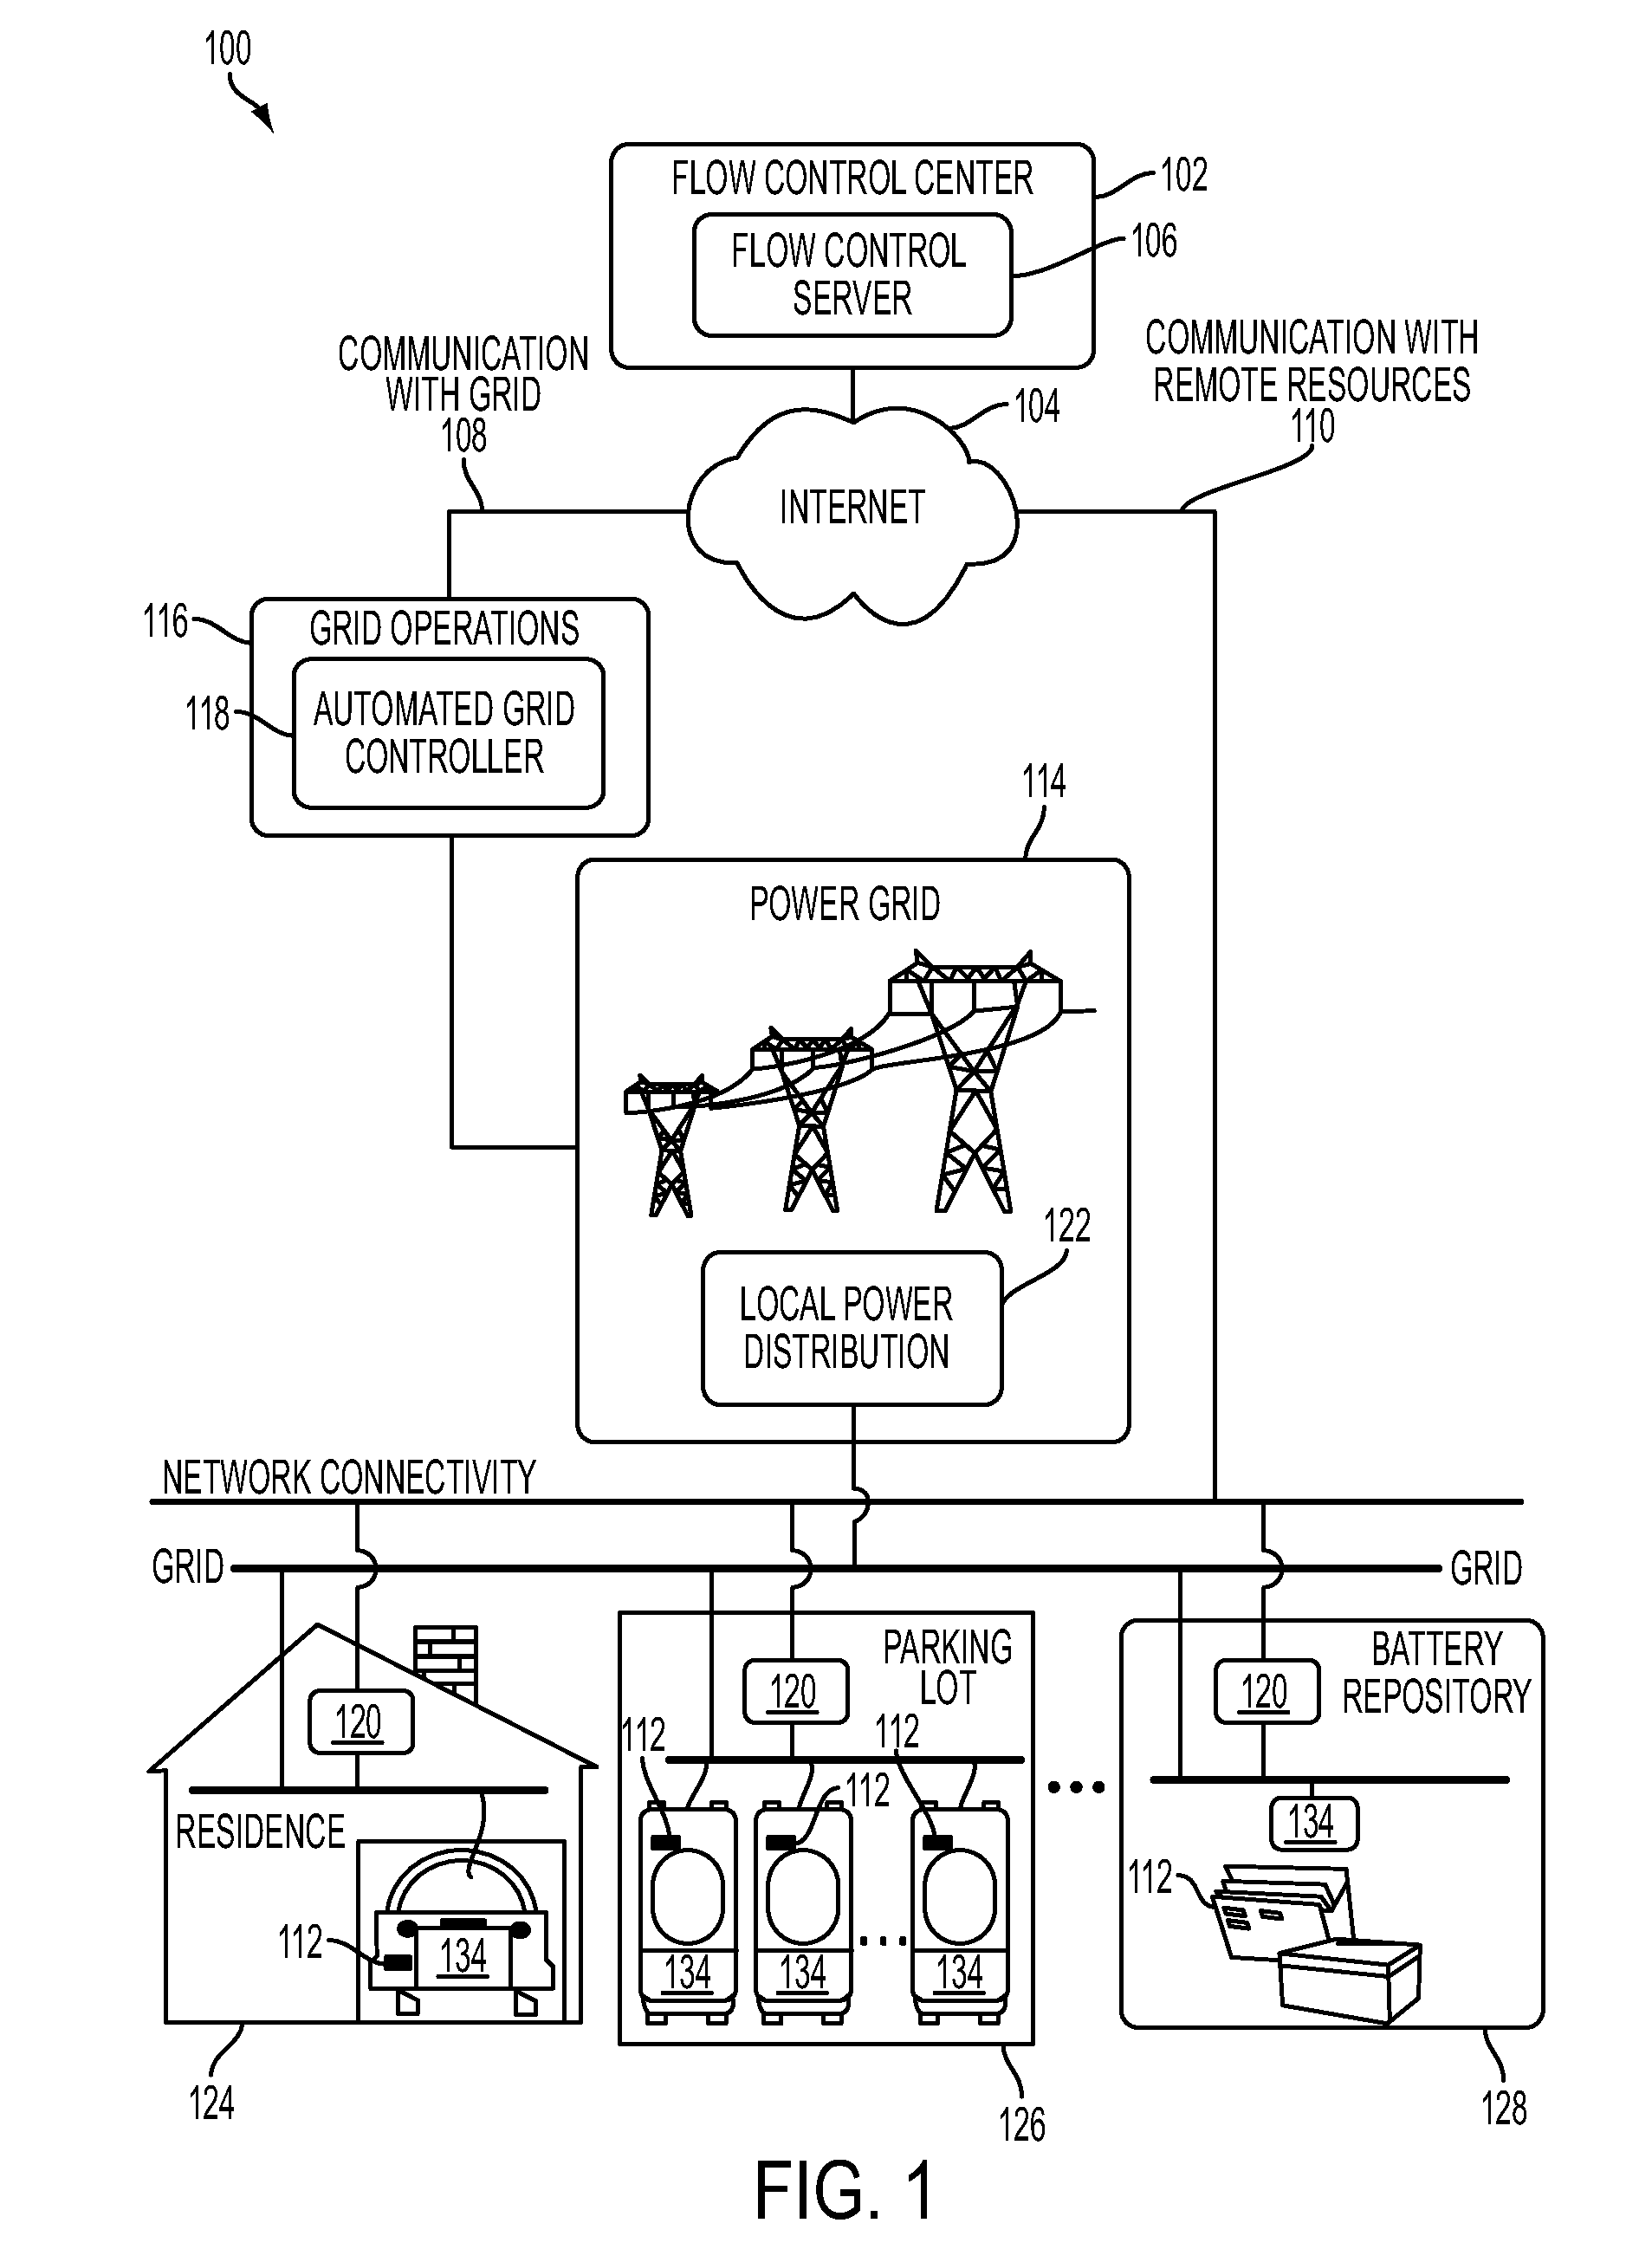 System and methods for smart charging techniques